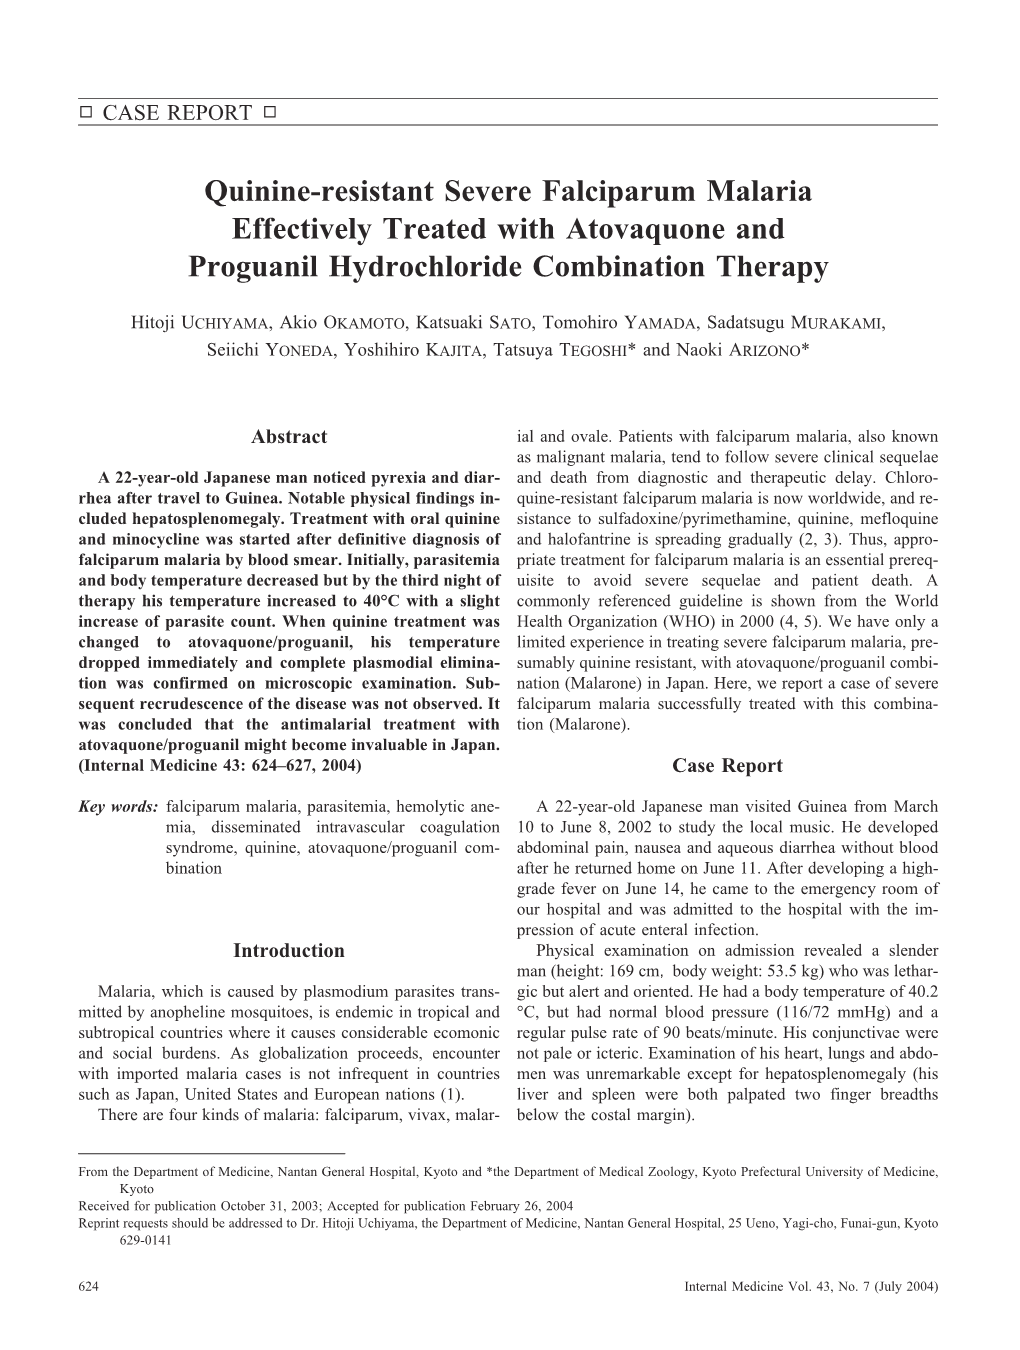 Quinine-Resistant Severe Falciparum Malaria Effectively Treated with Atovaquone and Proguanil Hydrochloride Combination Therapy